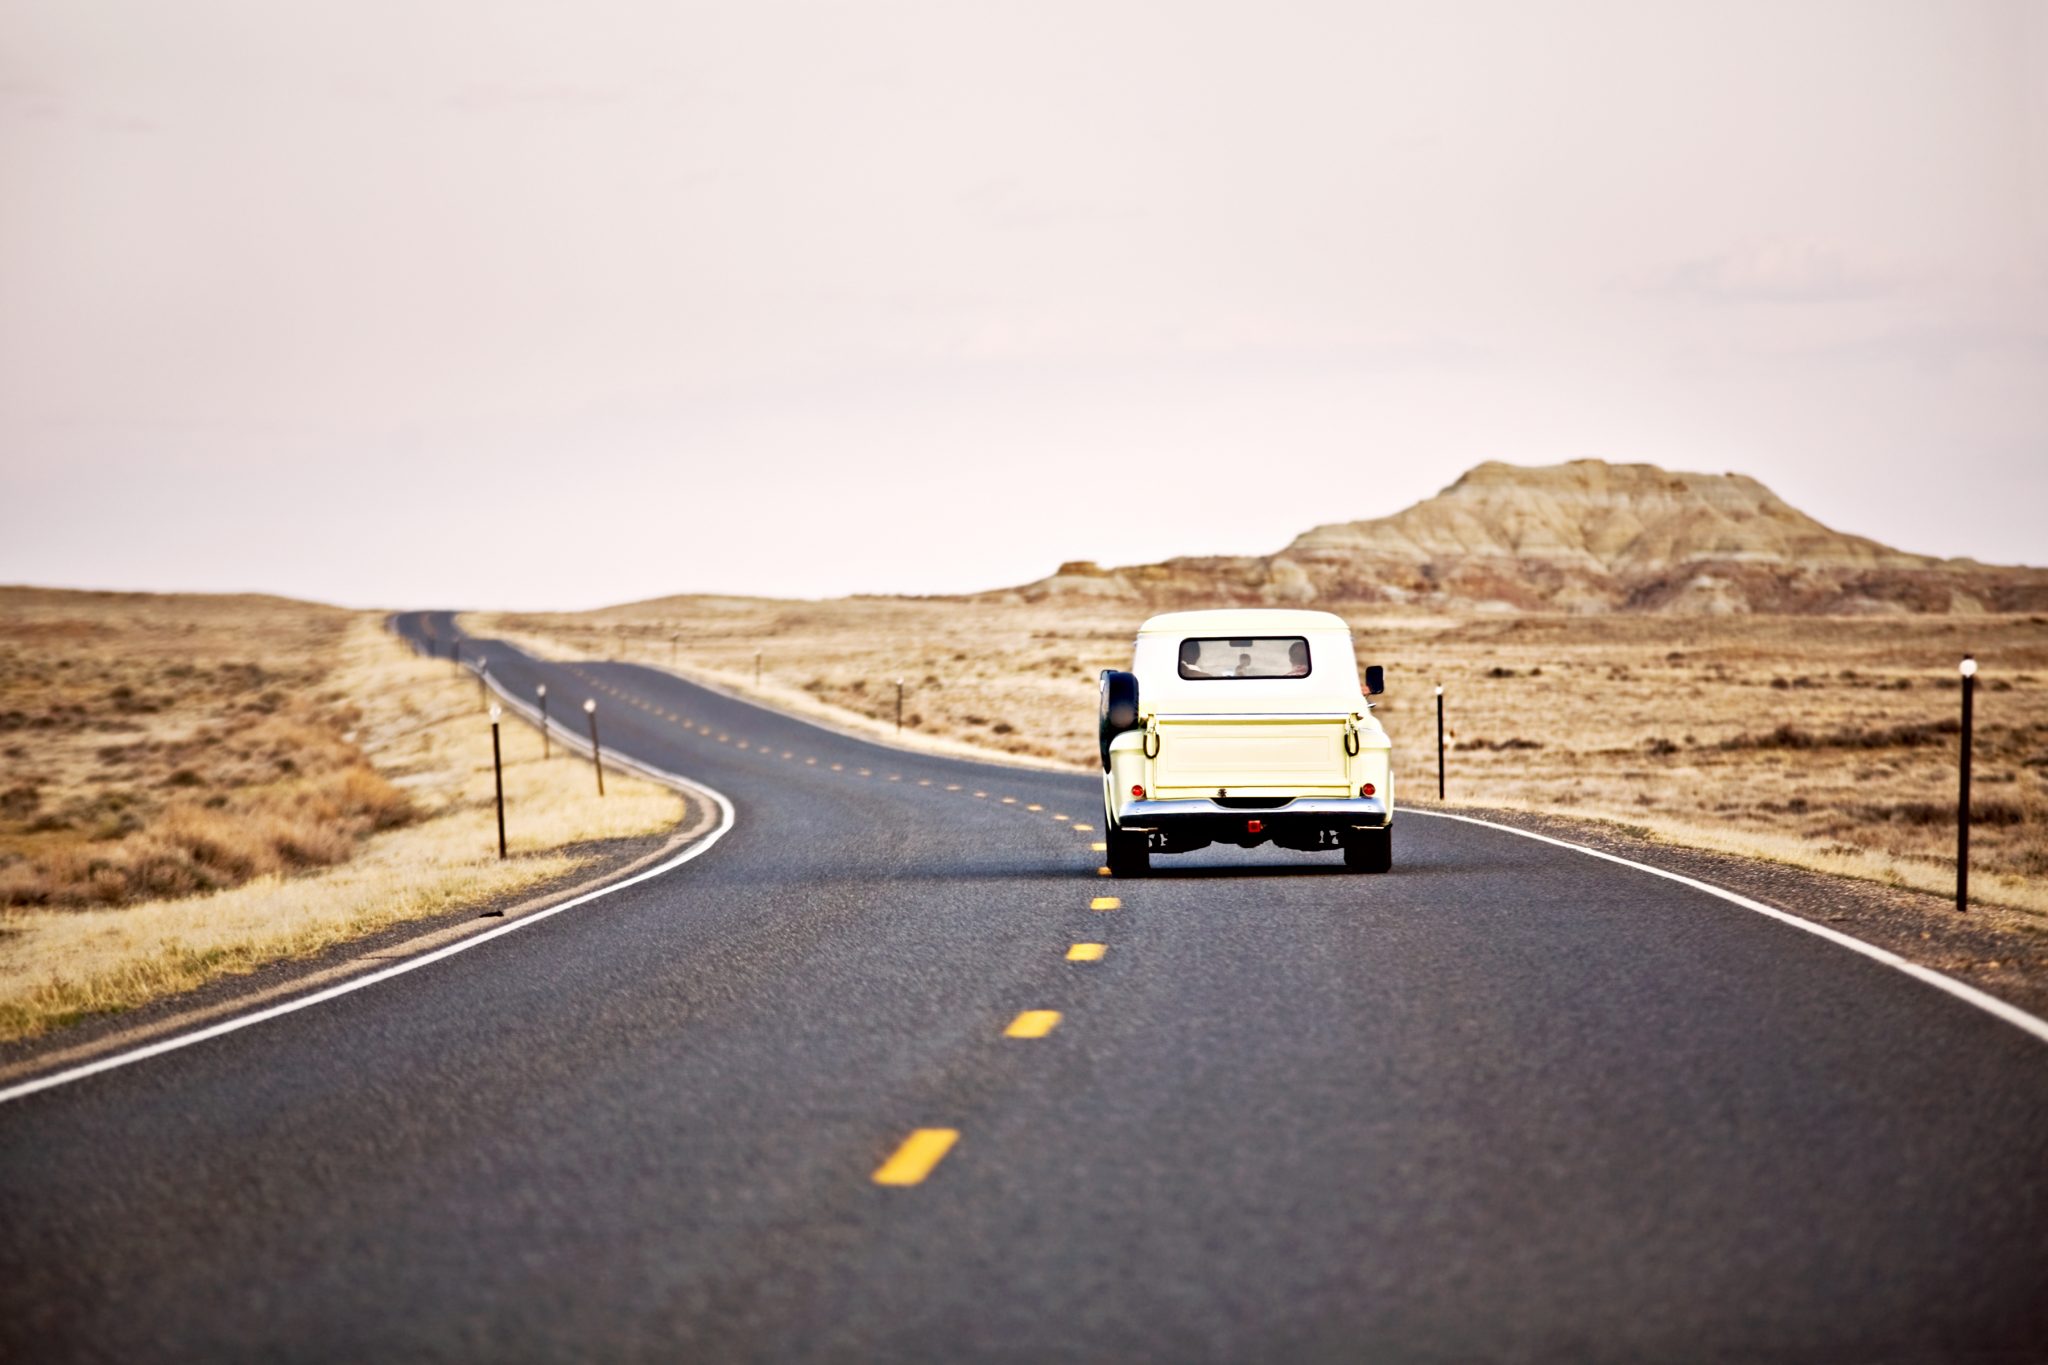 The Joys of Driving: Why You Should Road Trip